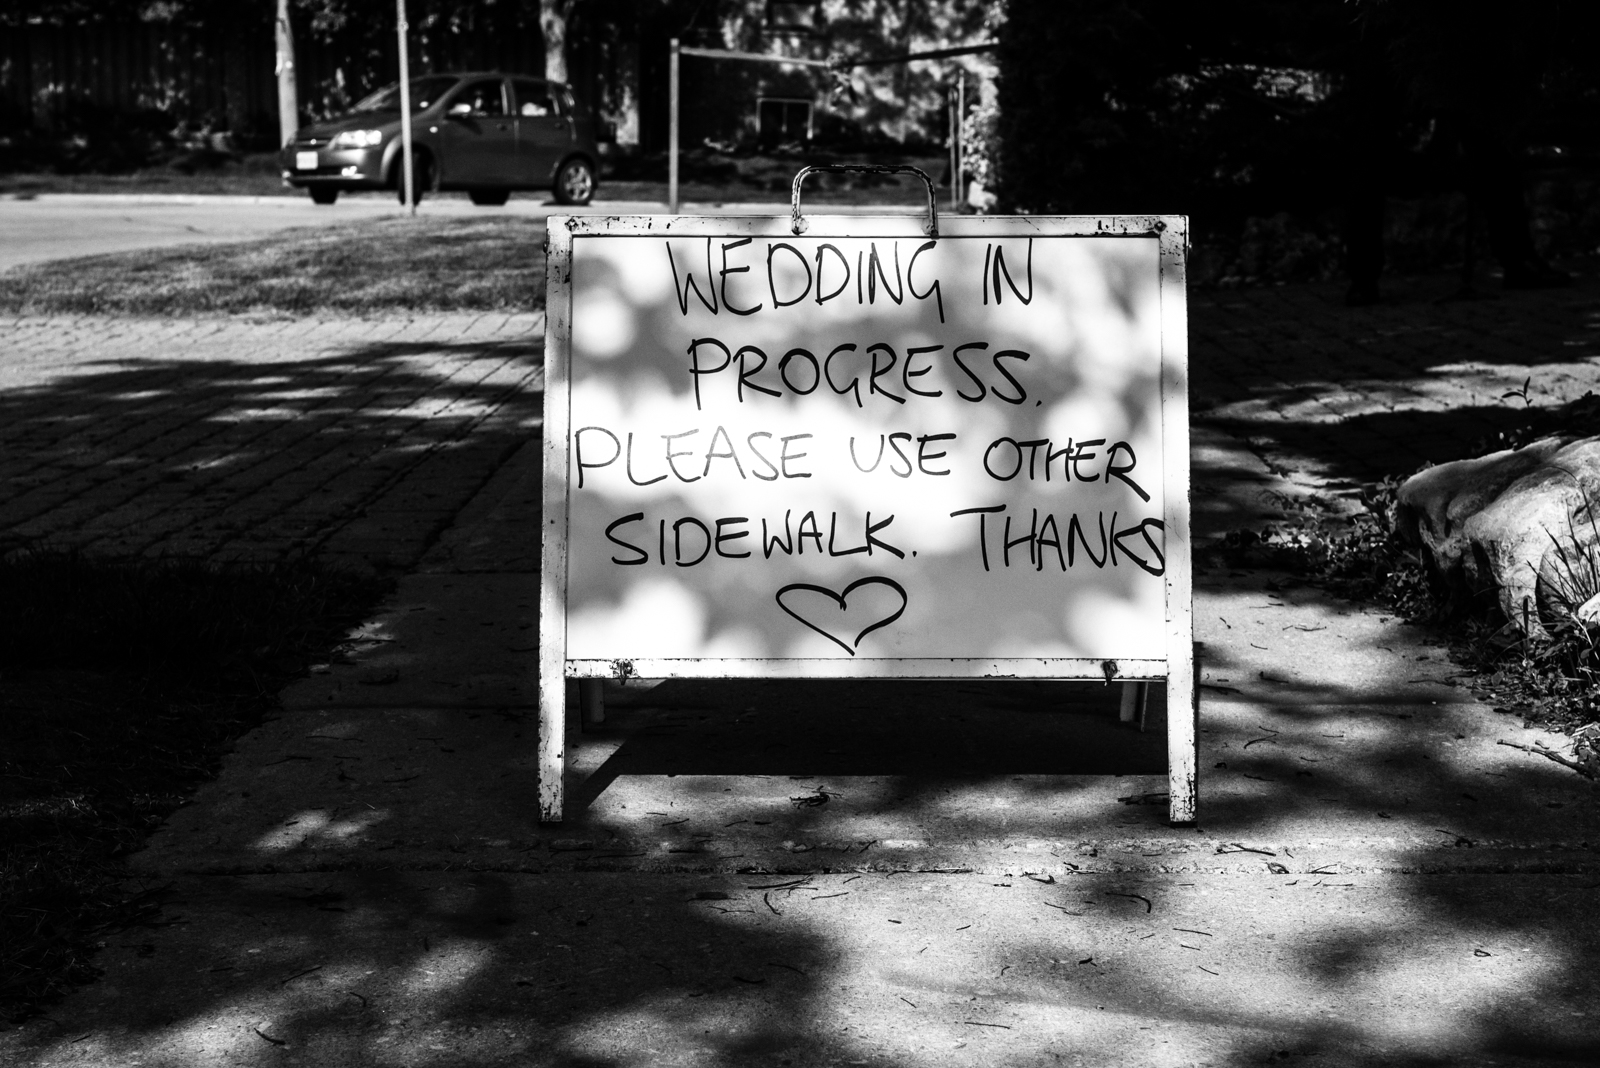 the sign on the road which said "wedding in progress please use other sidewalk"